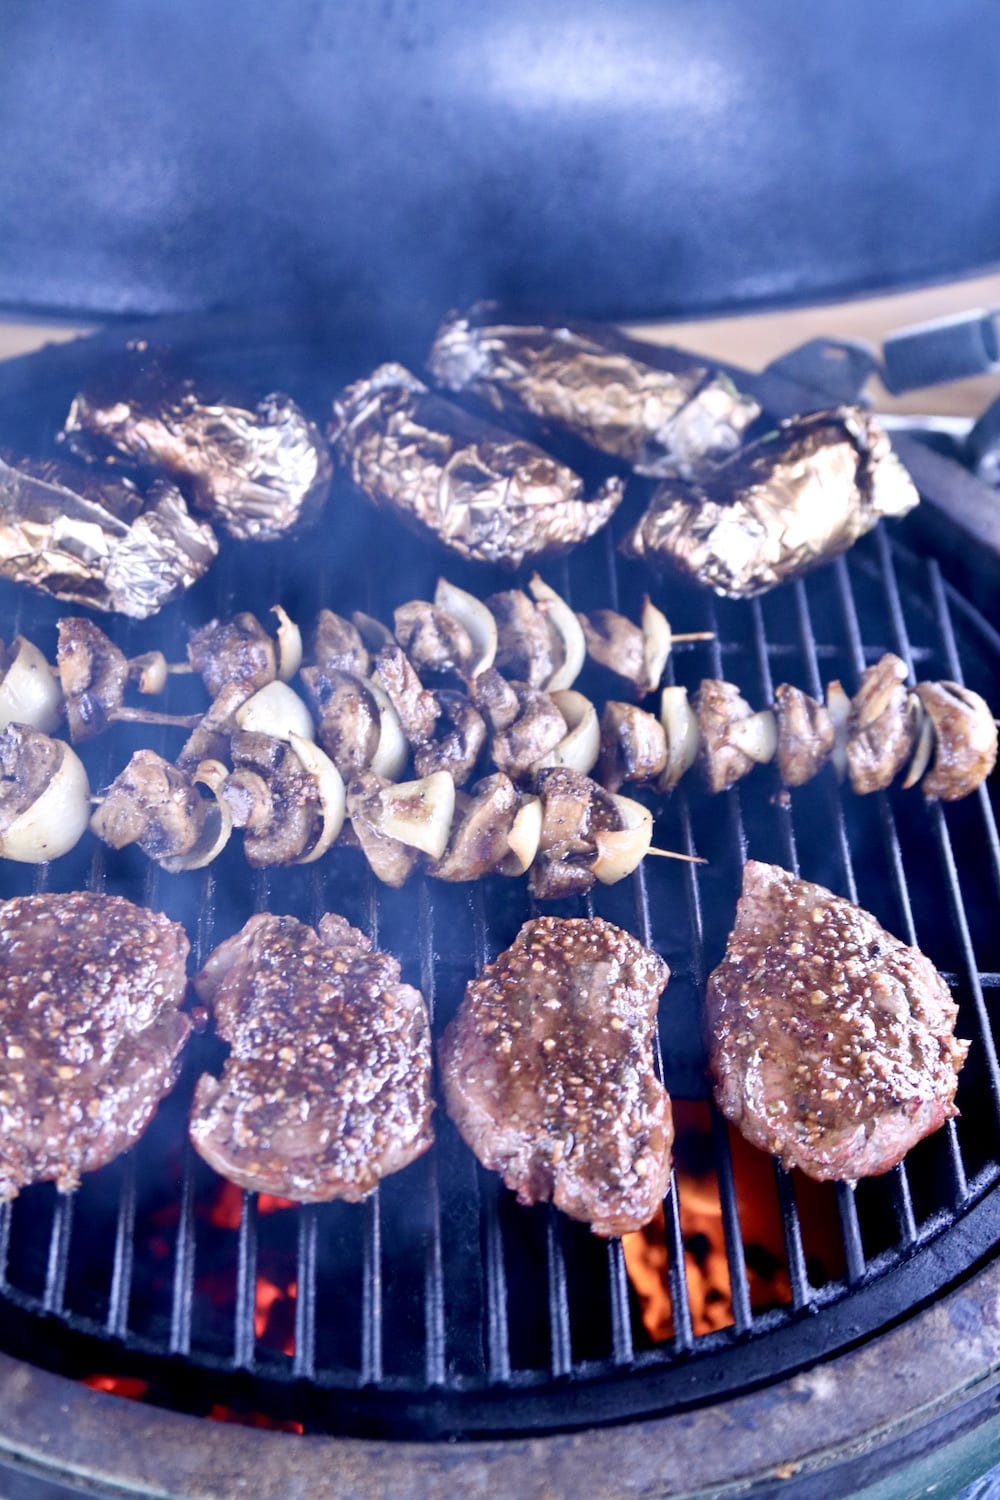 steaks, with mushrooms and baked potatoes on a grill